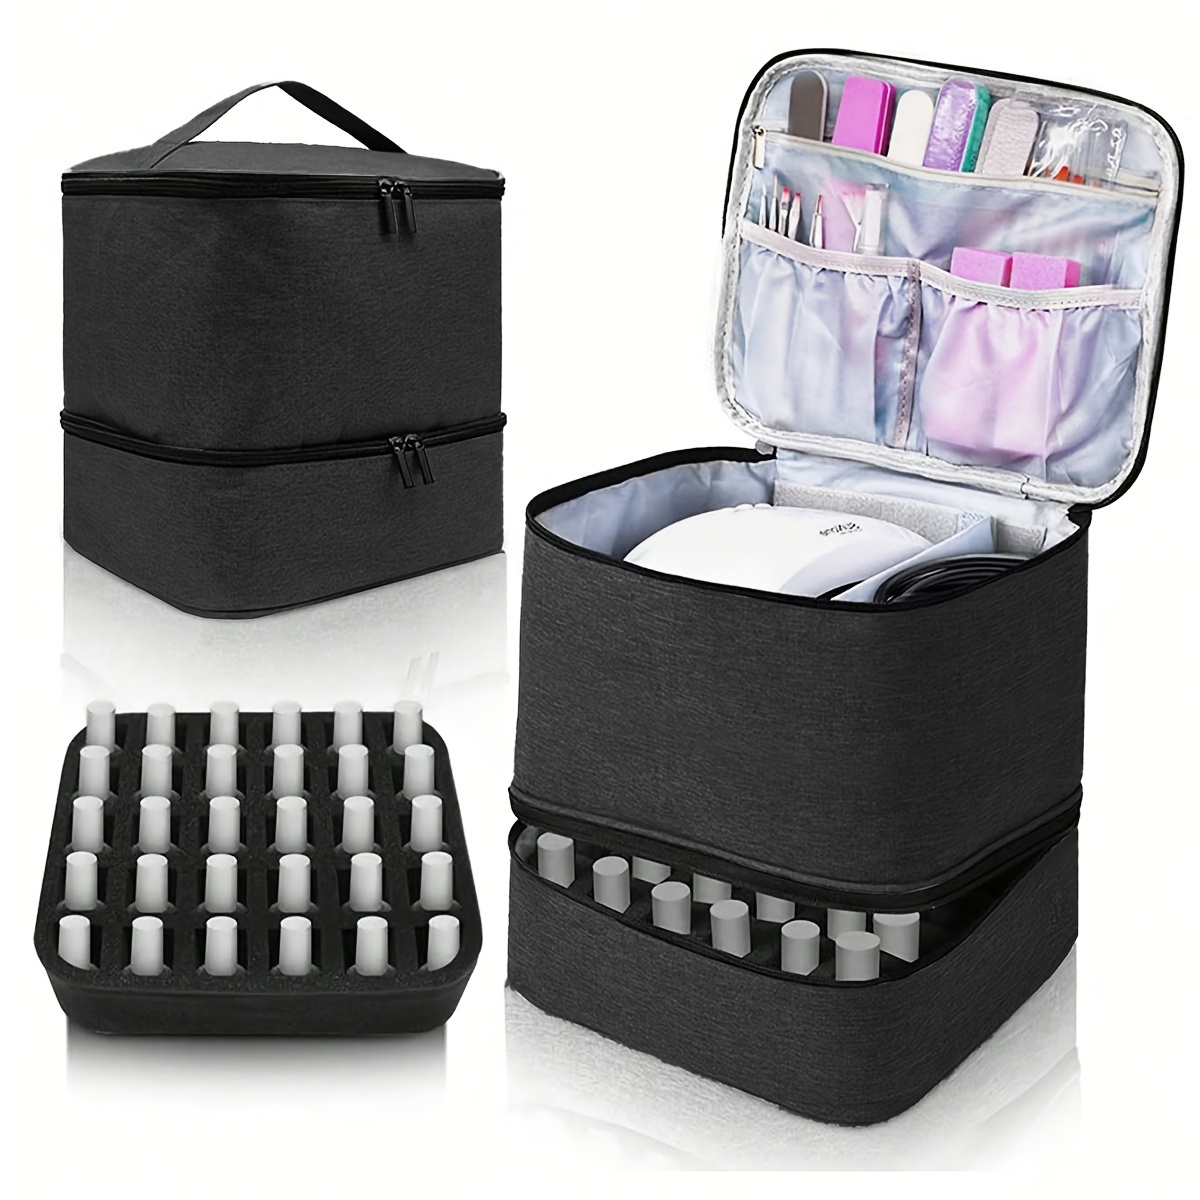 

Nail Polish Organizer, Double-layer Nail Tools And Nail Dryer Case, Nail Polish Carrying Case With Dividers, Essential Oil Storage Bag Christmas Gift